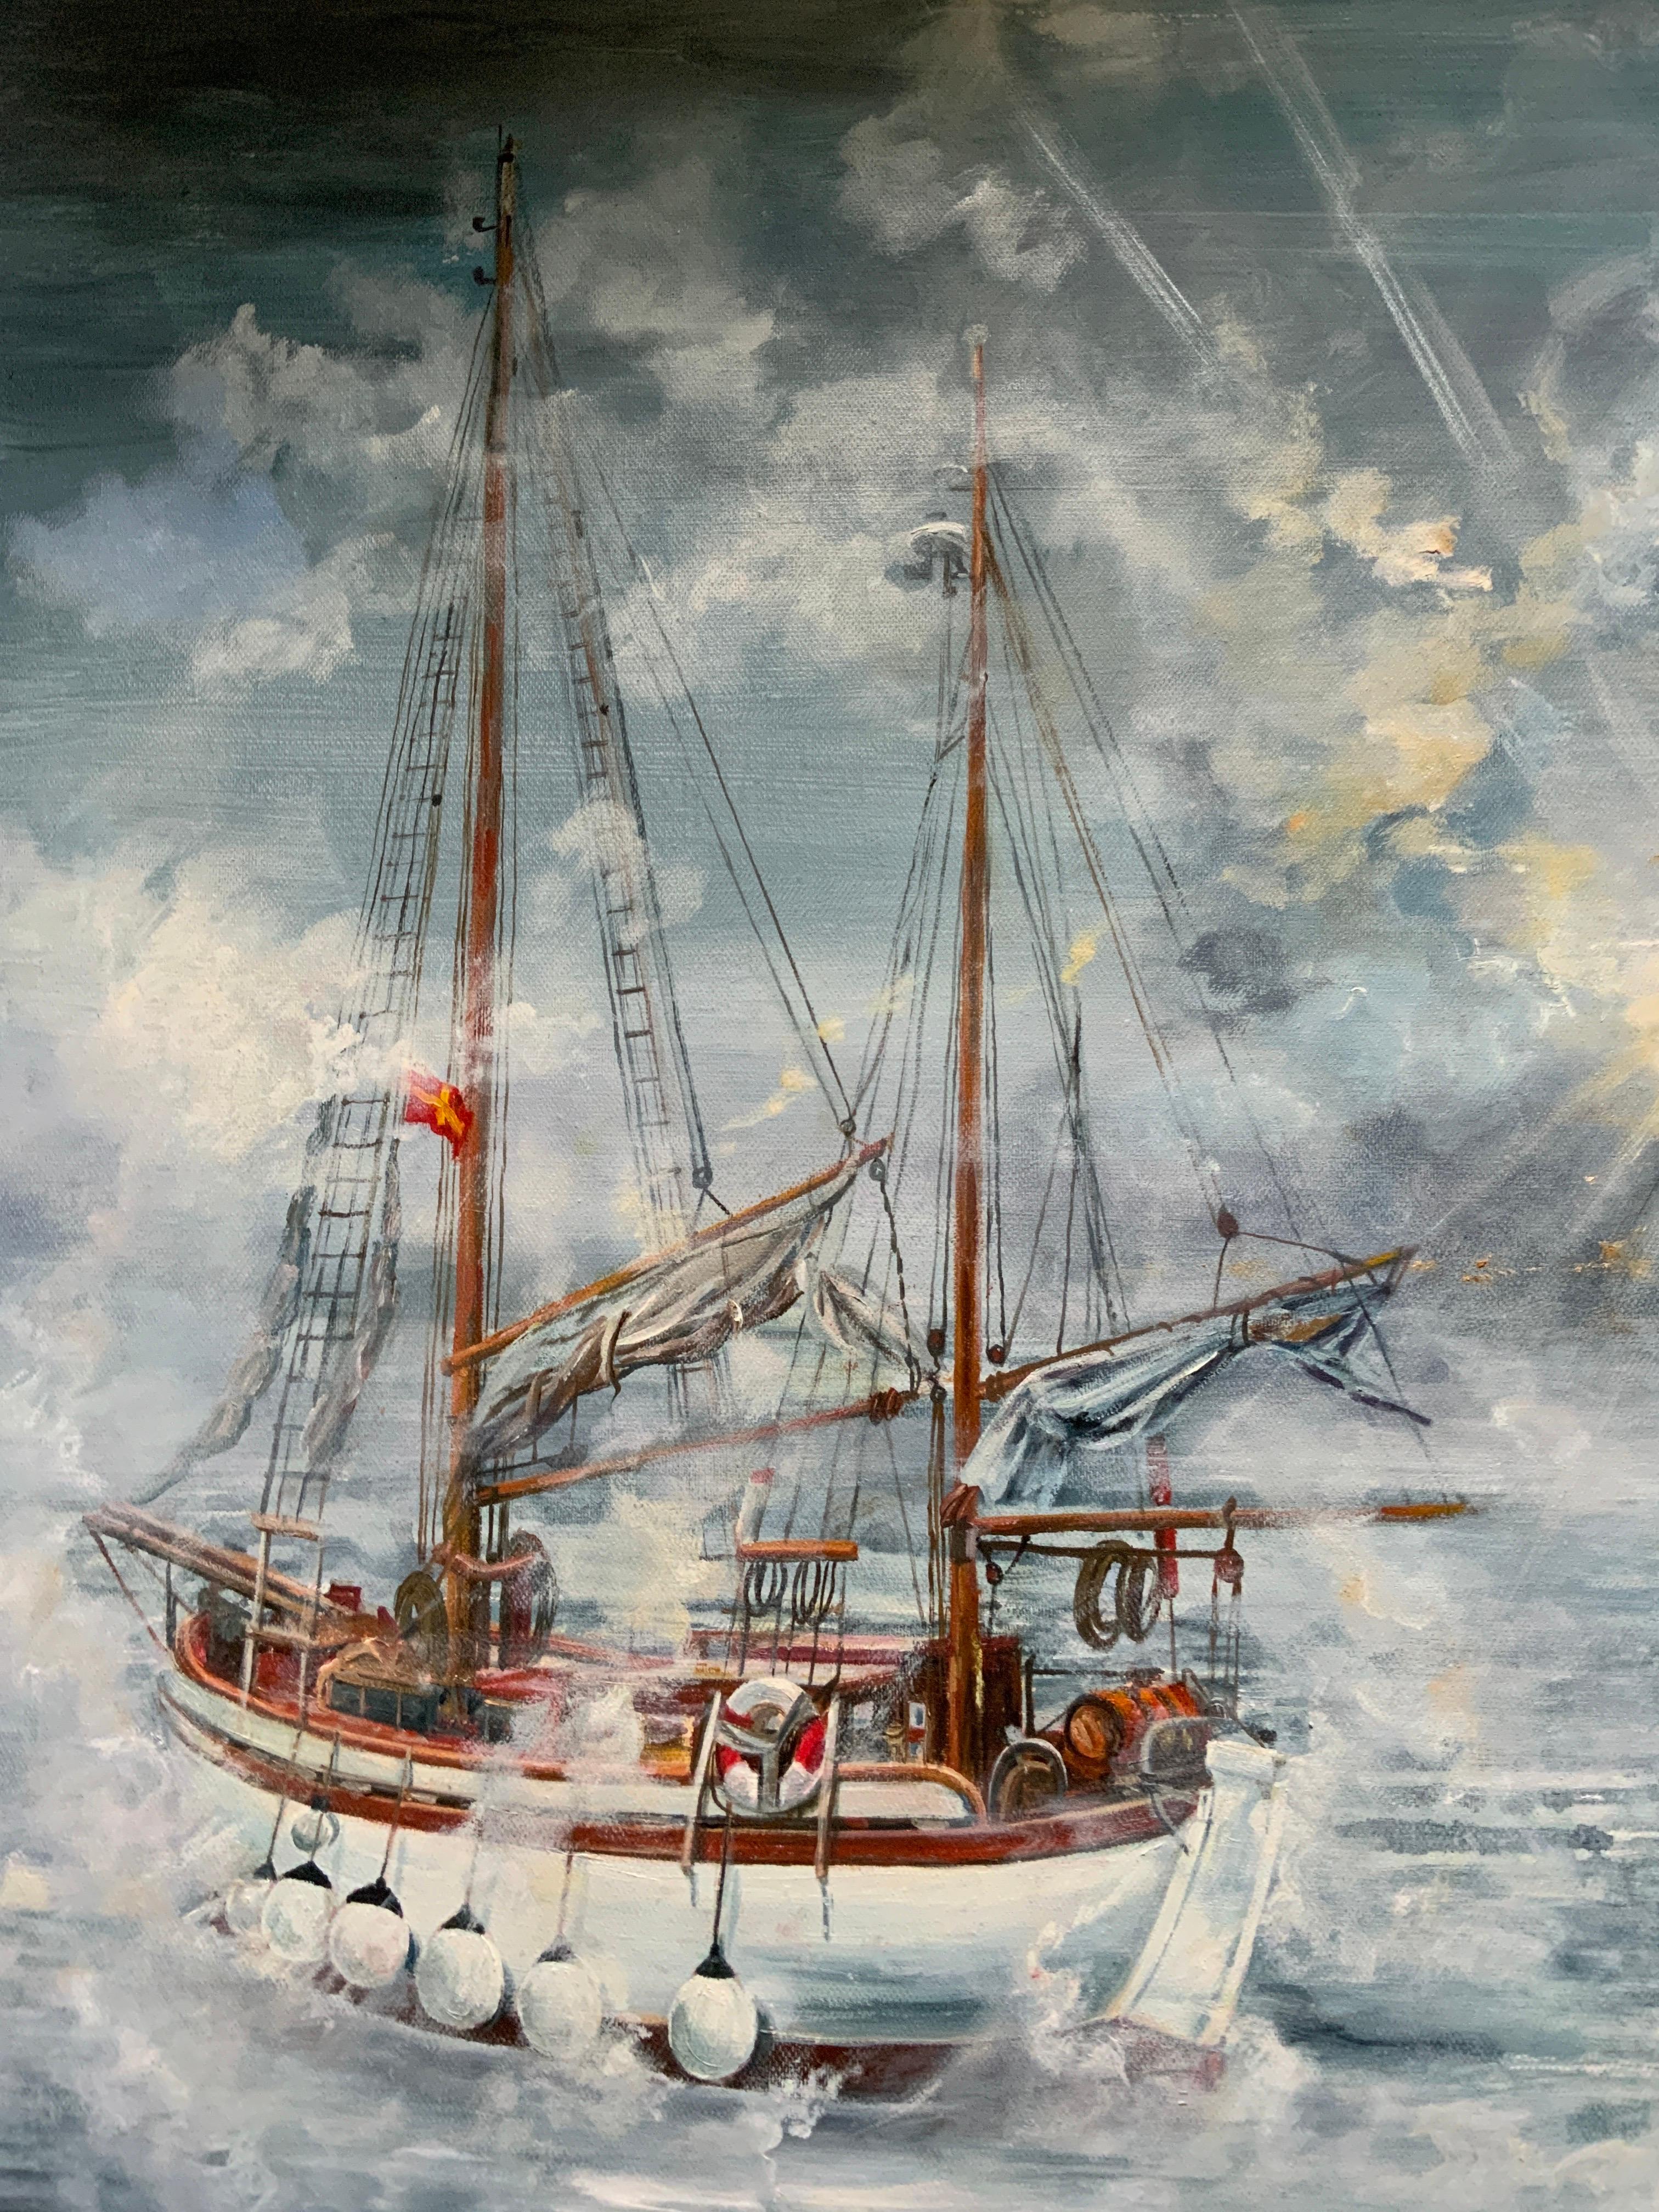  My Ship (Ship and Clouds) - Realist Painting by Chulkova Elena